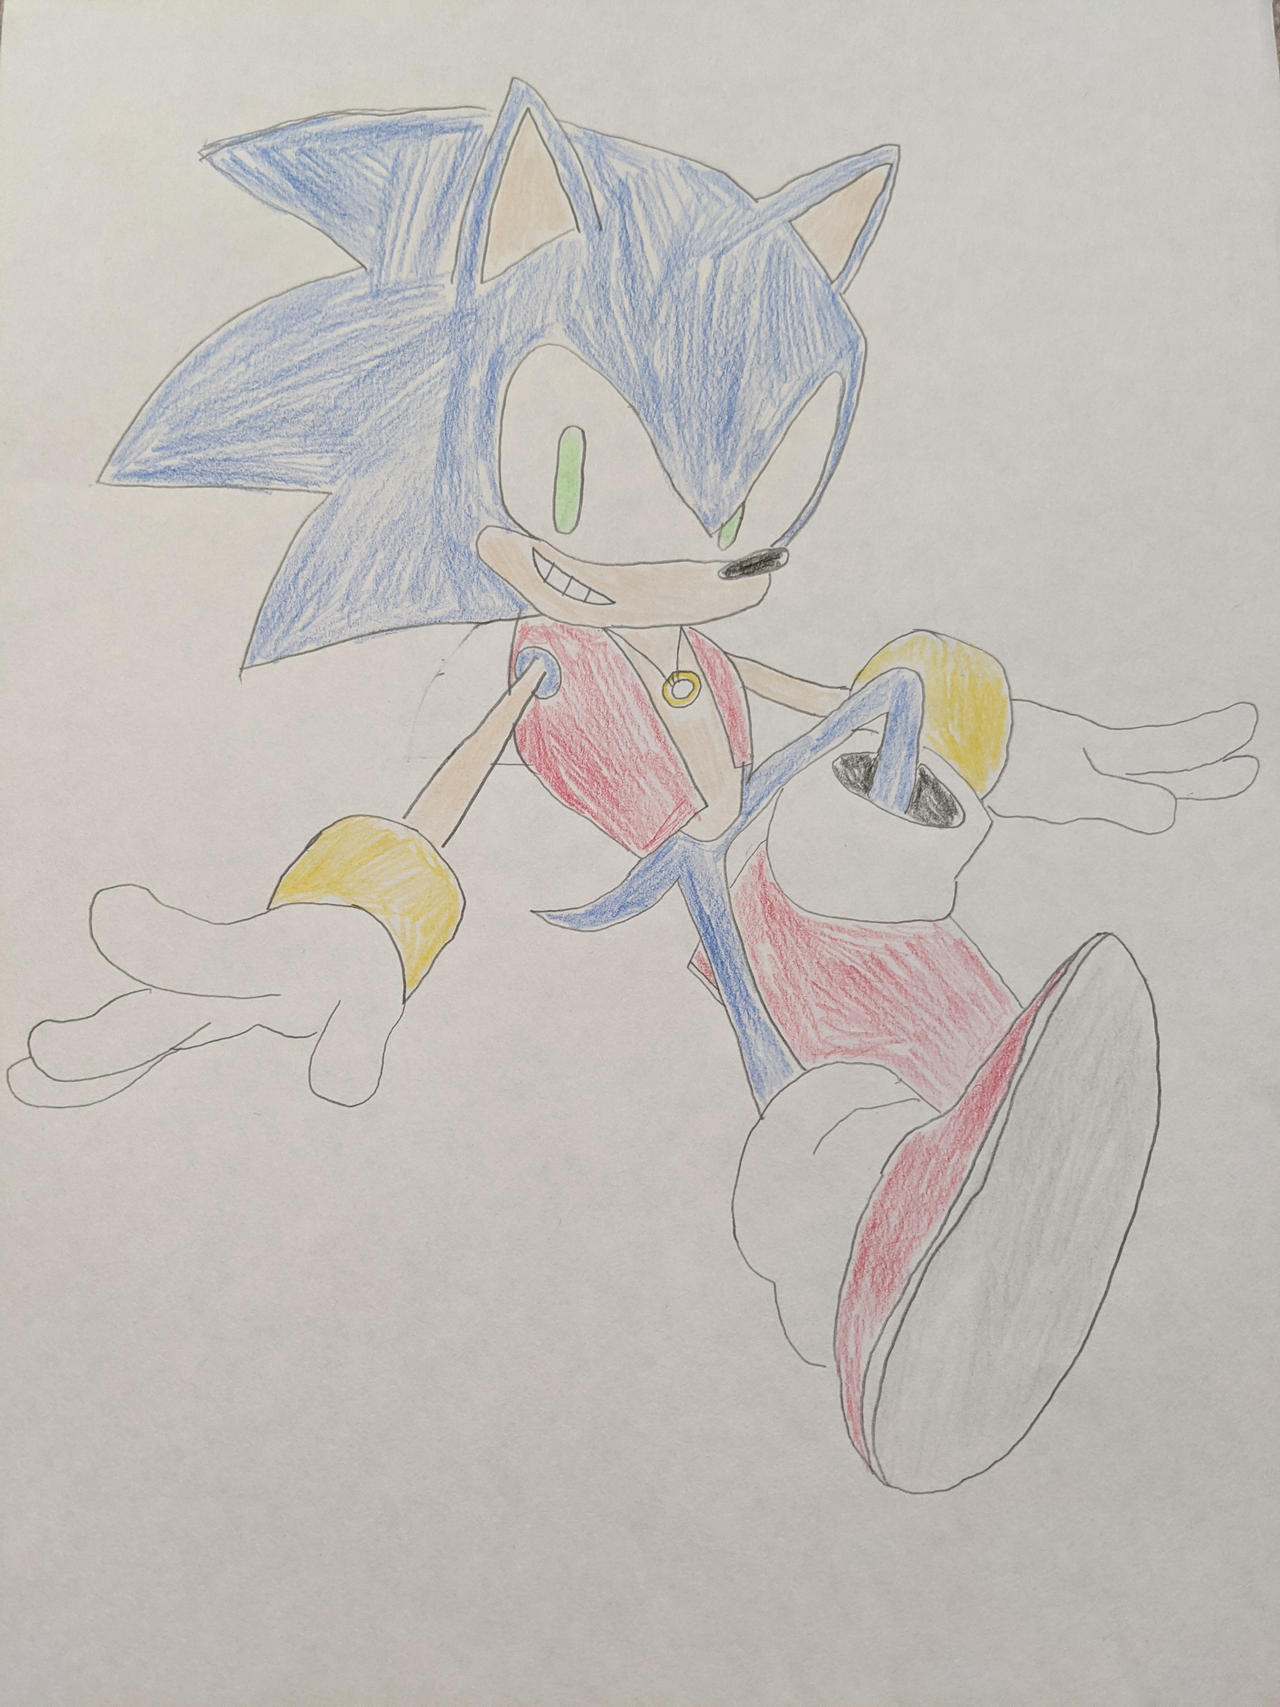 Shaver the hedgehog the fusion of silver, sonic and sha…